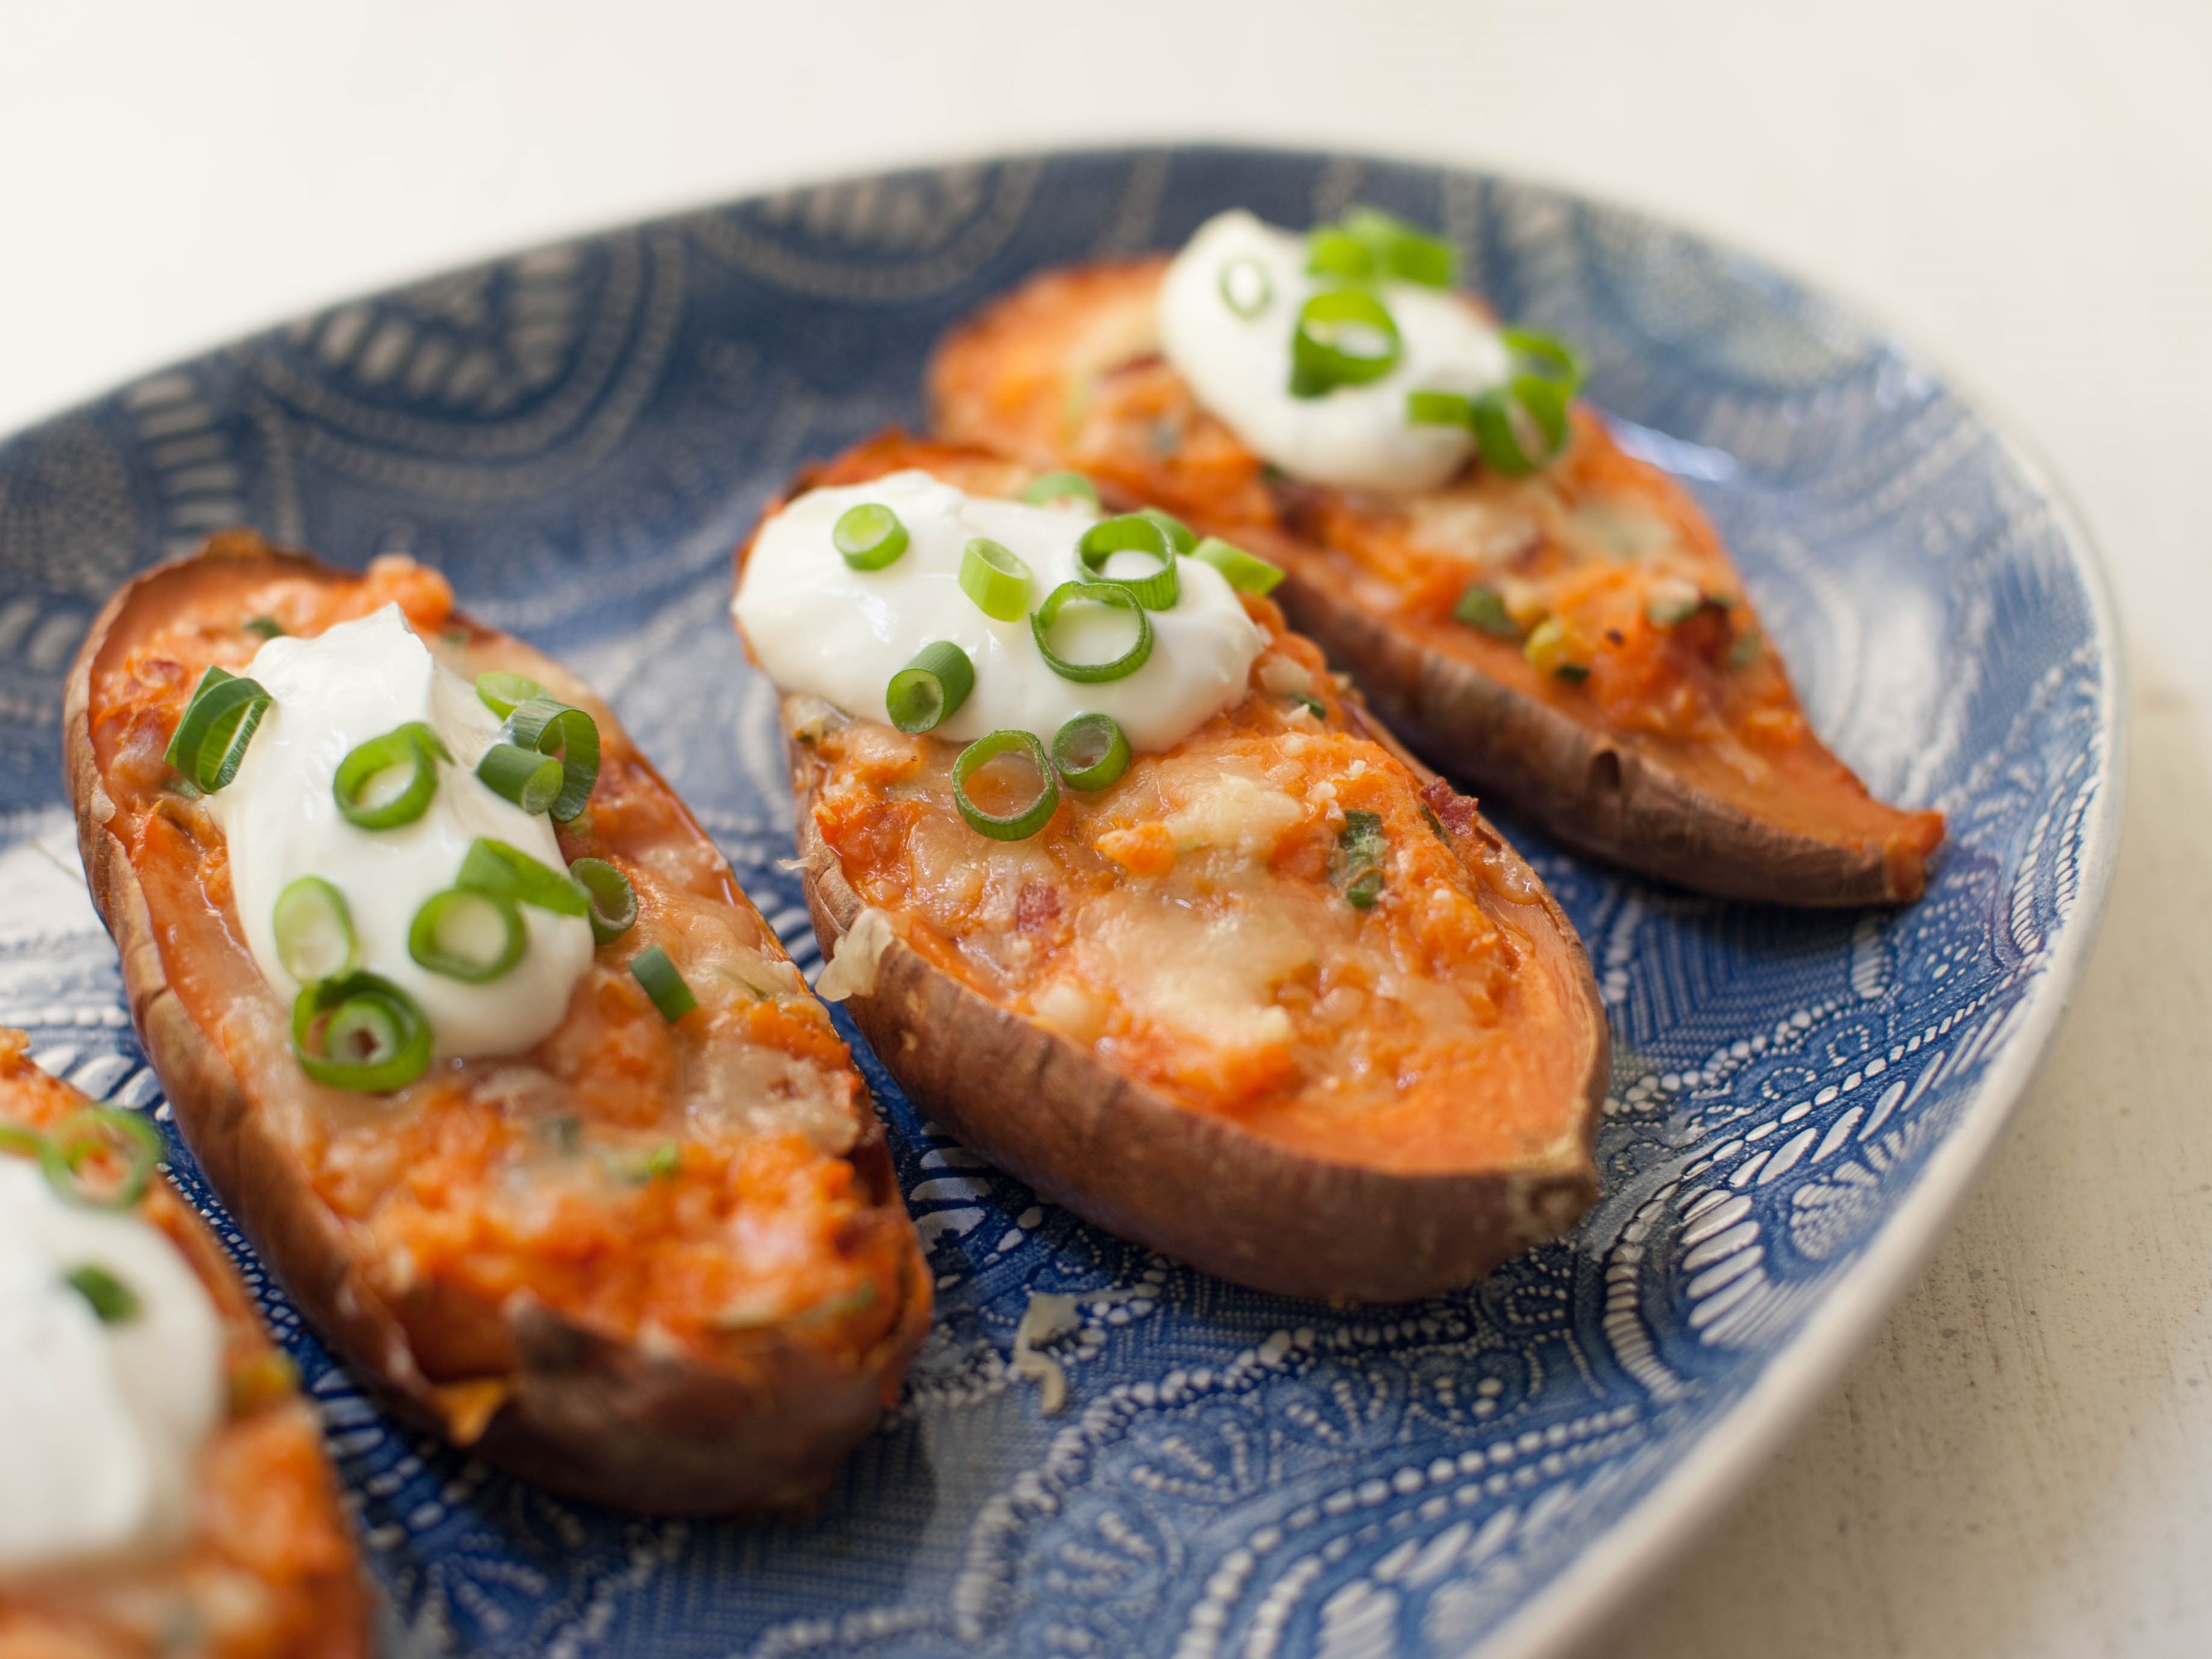 https://www.foodnetwork.com/content/dam/images/food/fullset/2019/5/14/YW1401_Twice-Baked-Maple-Bacon-Sweet-Potatoes_s4x3.jpg